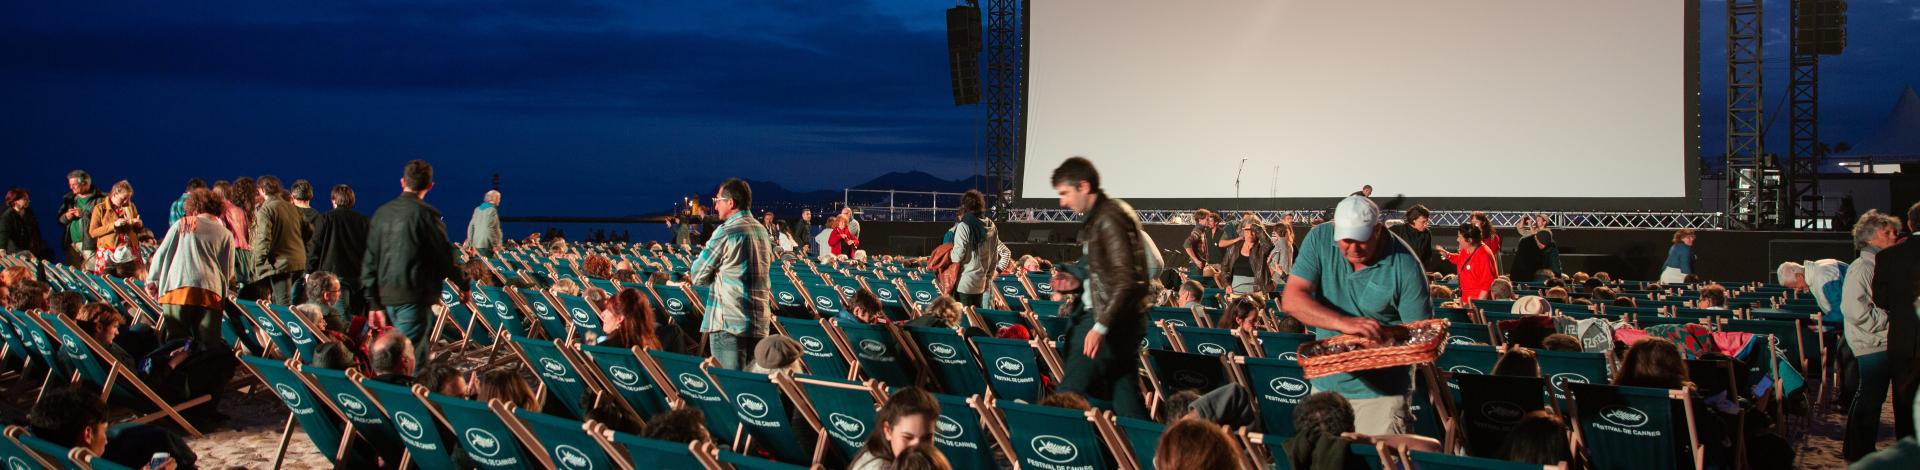 Outdoor movie screen with dark background and rows of people looking at the screen